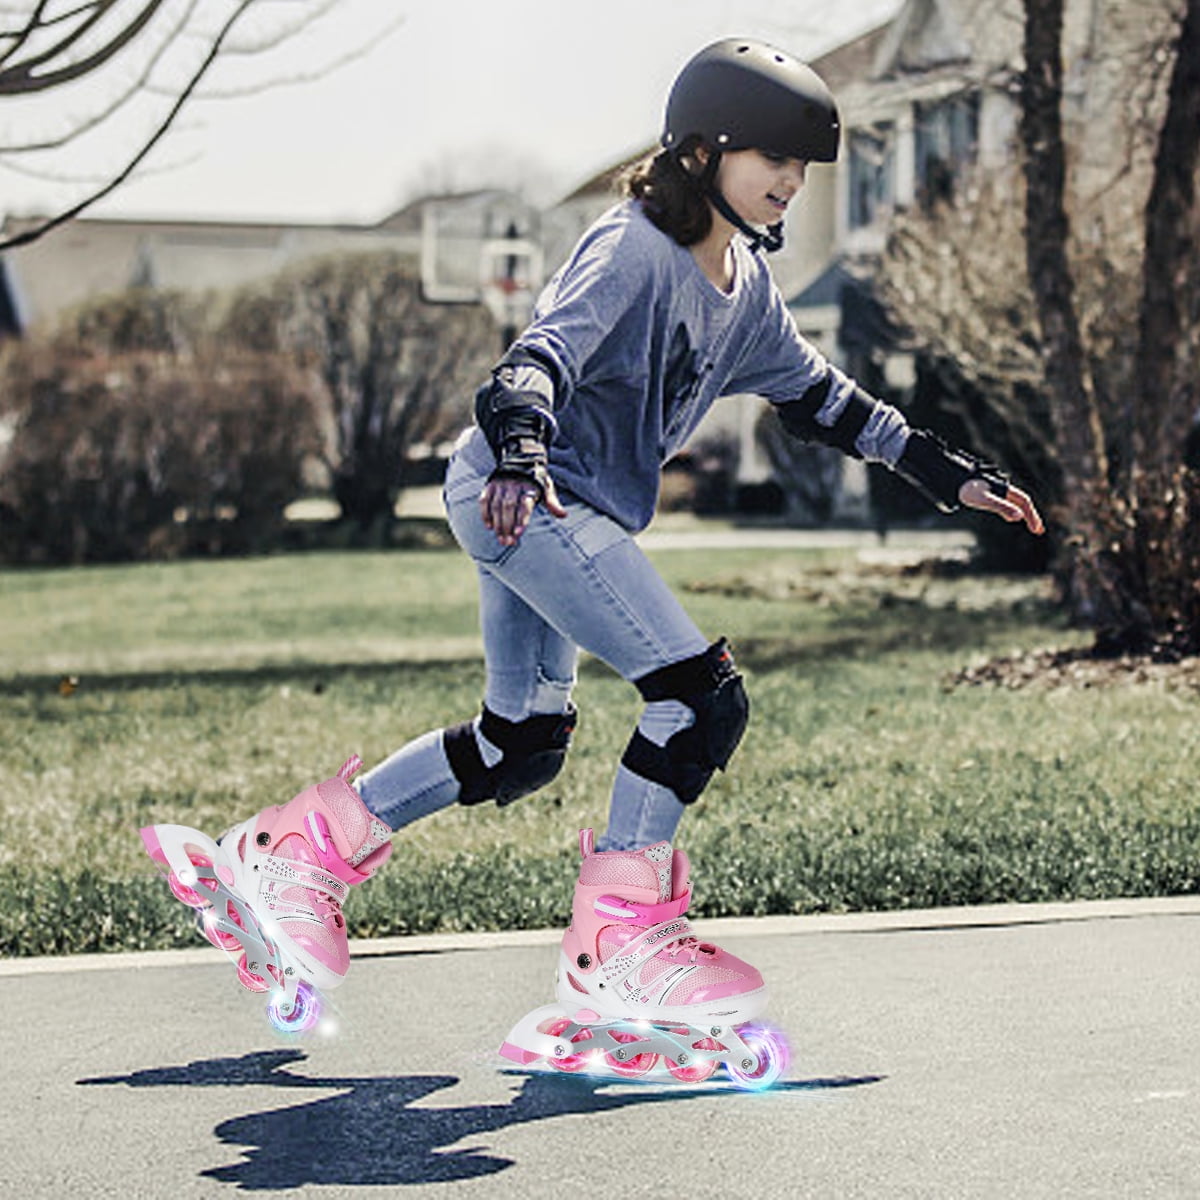 TronX Adjustable Youth and Junior Inline Roller Hockey Skates 